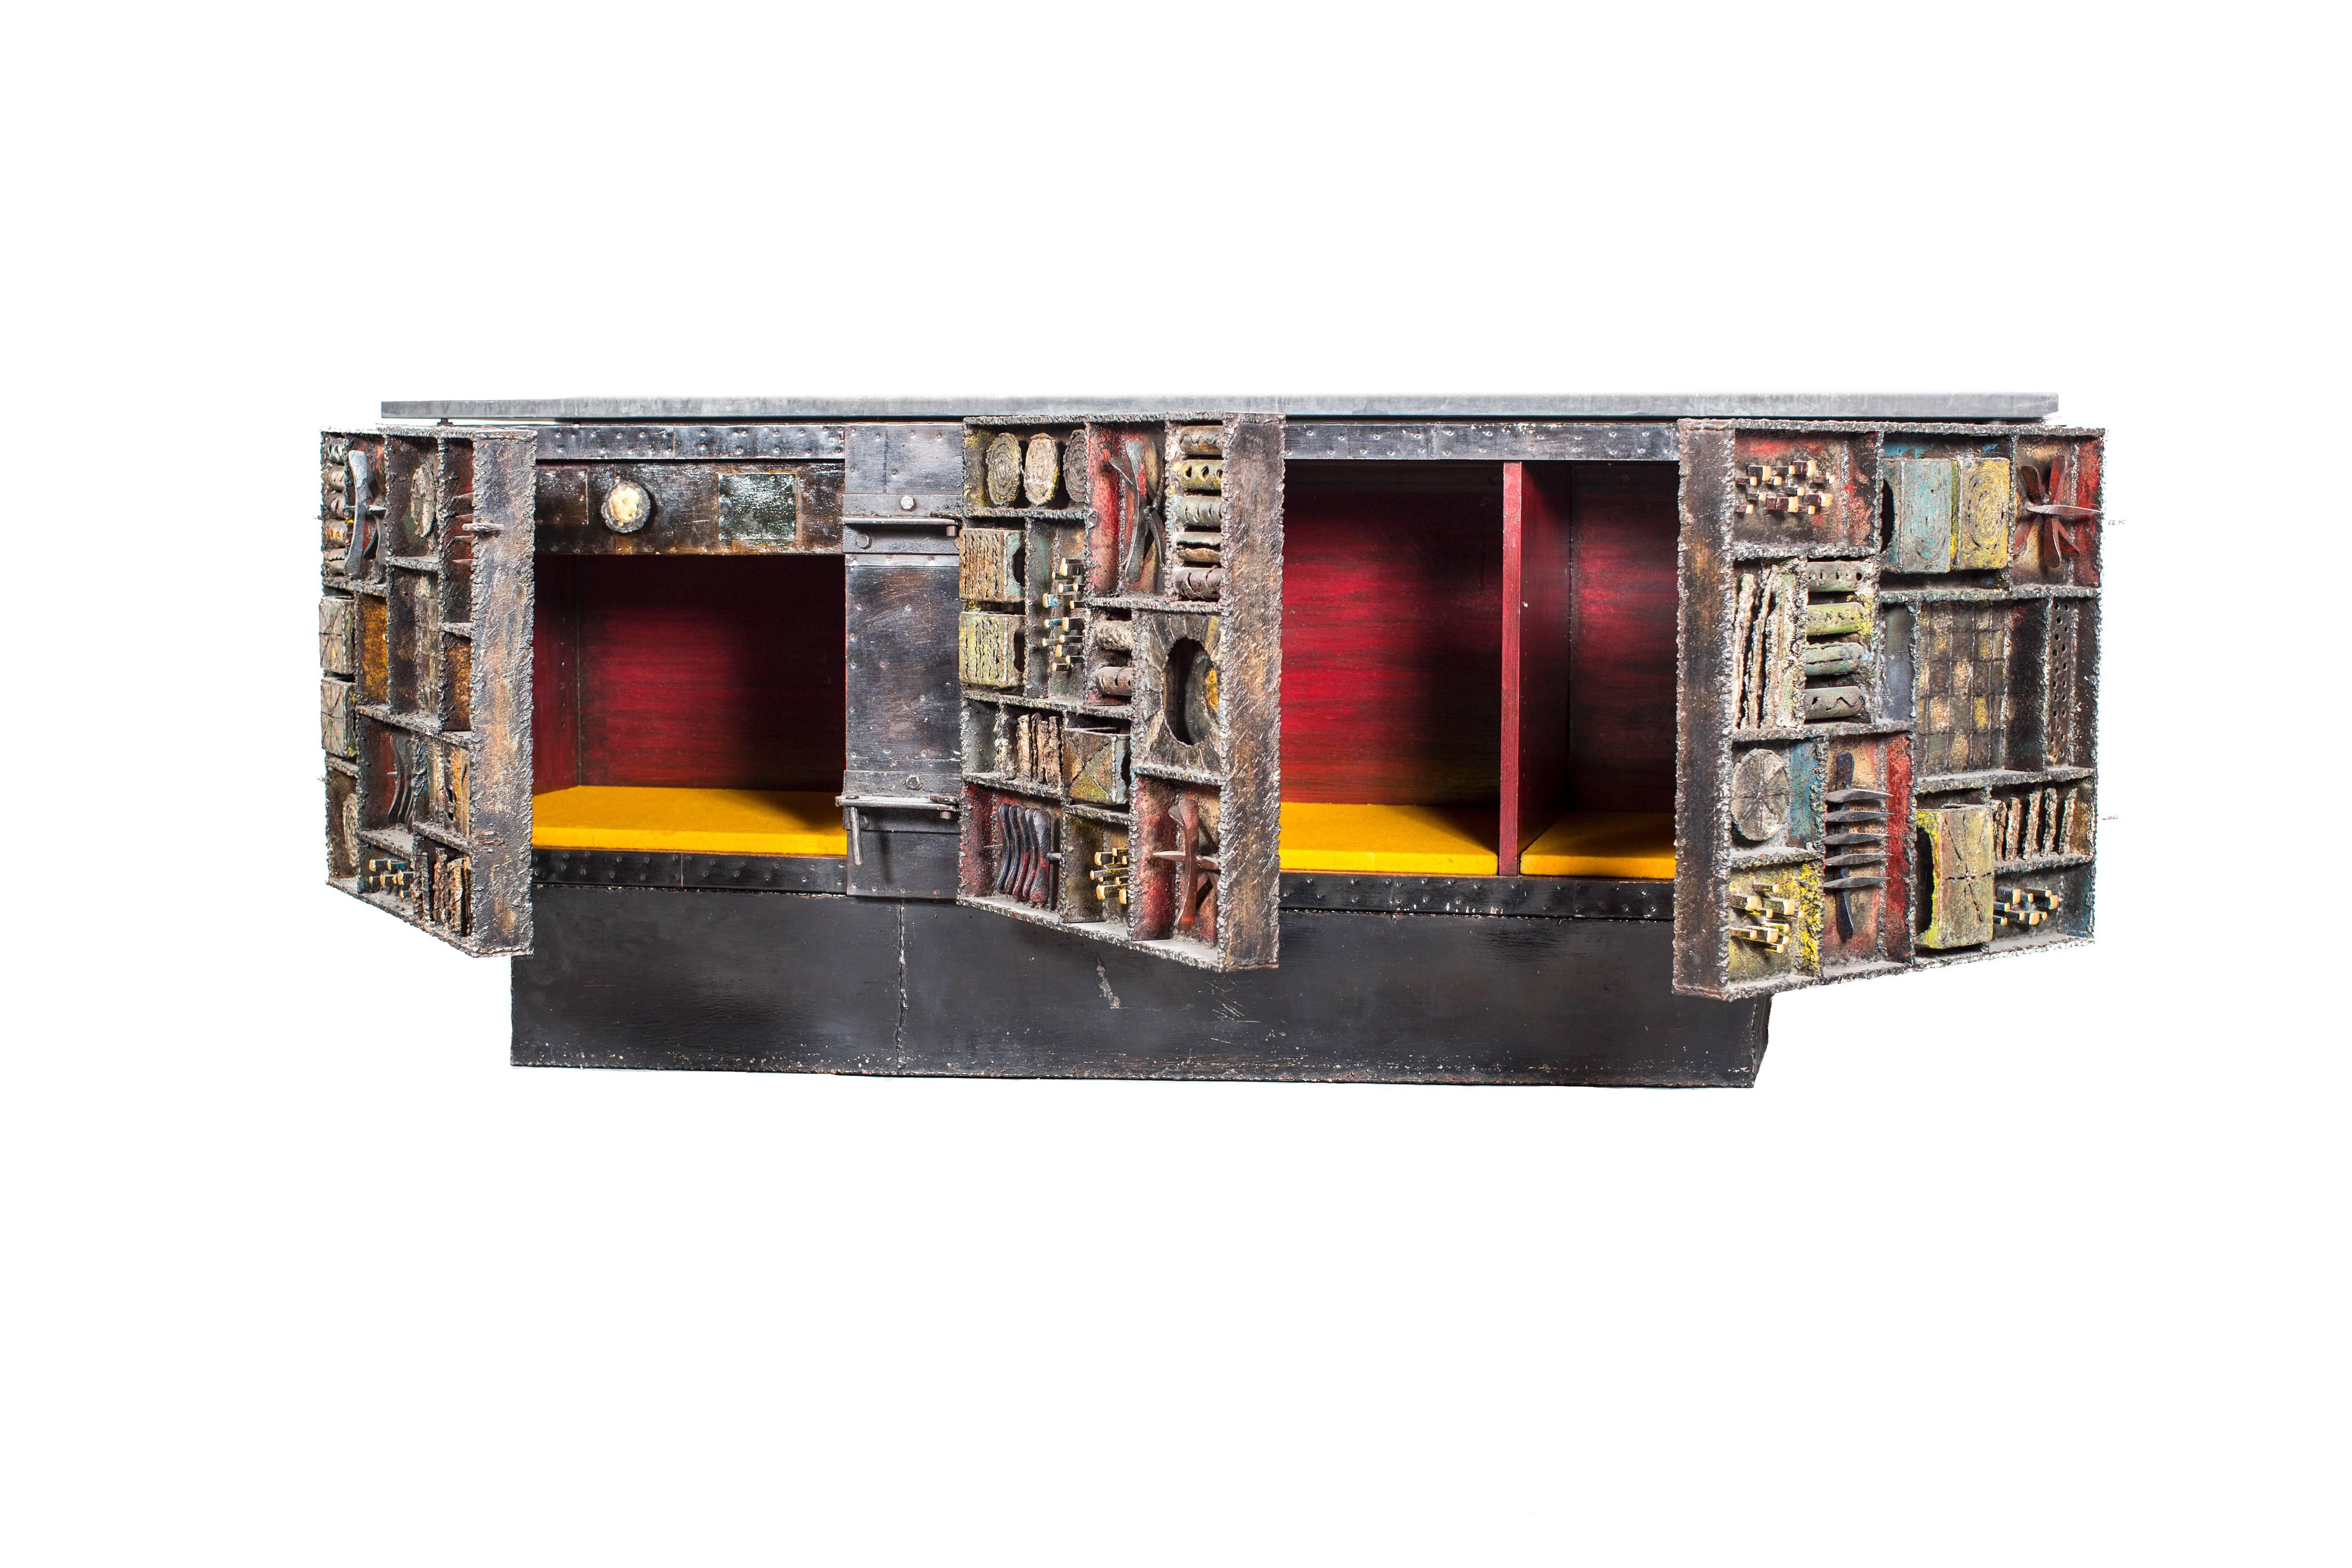 Welded, torch-cut and polychromed steel, bronze and slate top front cabinet by Paul Evans, 1968, welded signature under door (Paul Evans 68 D.R.).